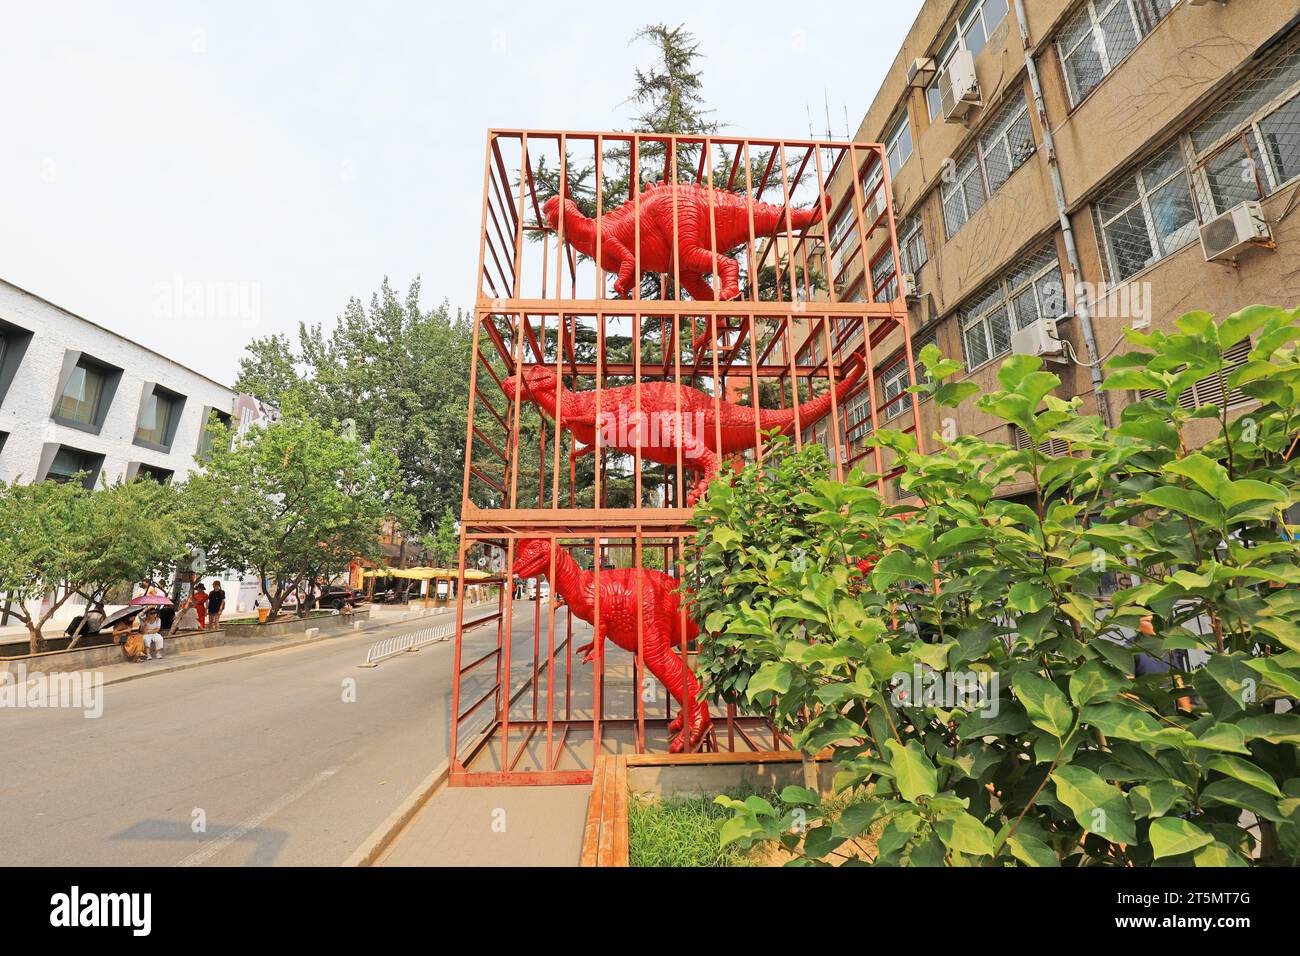 Red dinosaur sculptures in cages Stock Photo